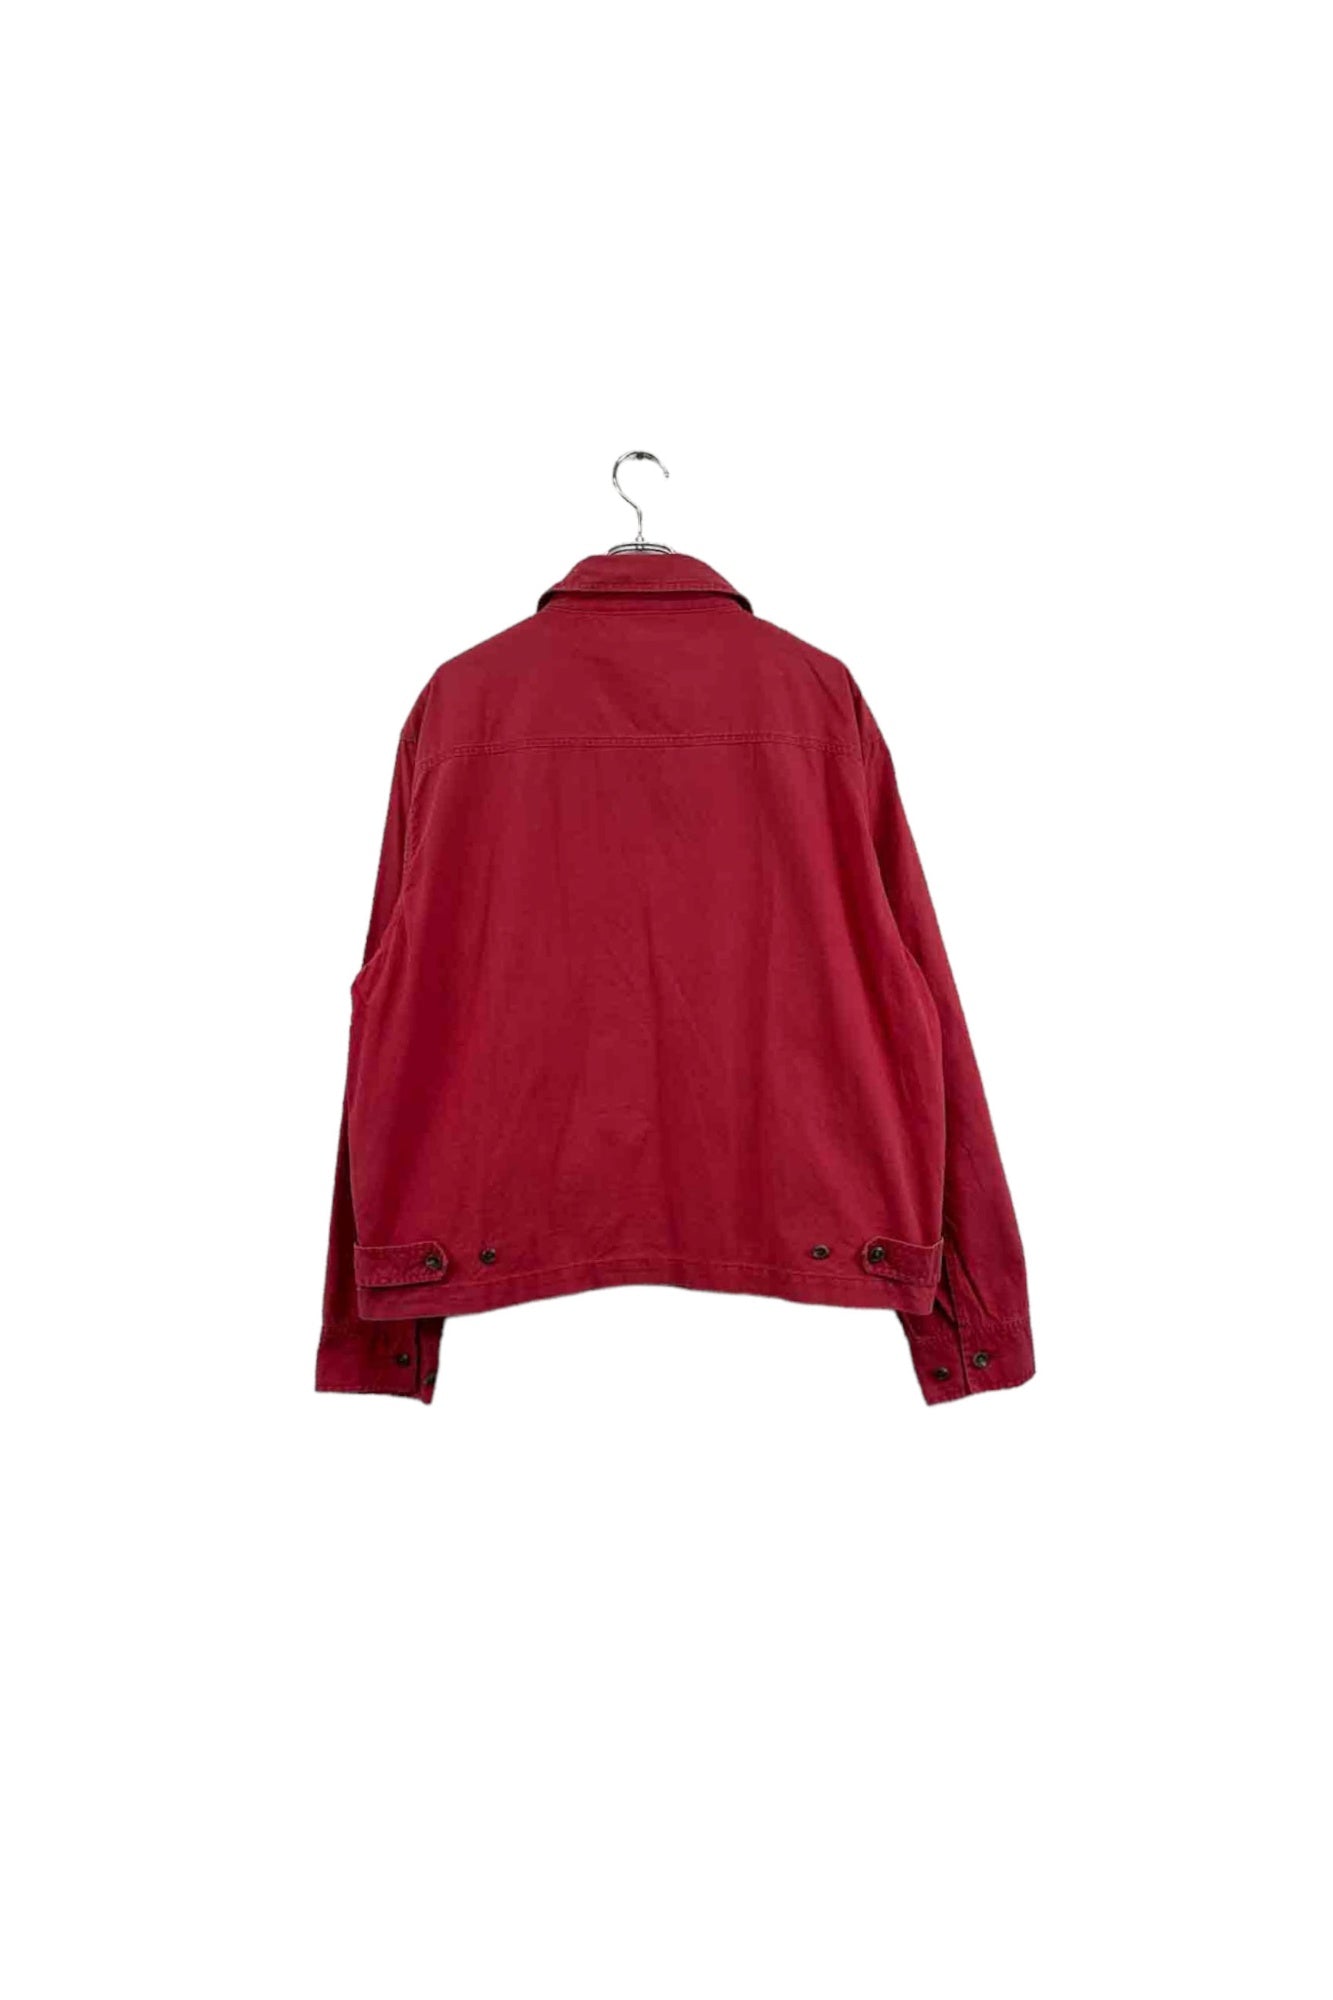 90‘s Polo by Ralph Lauren red cotton jacket